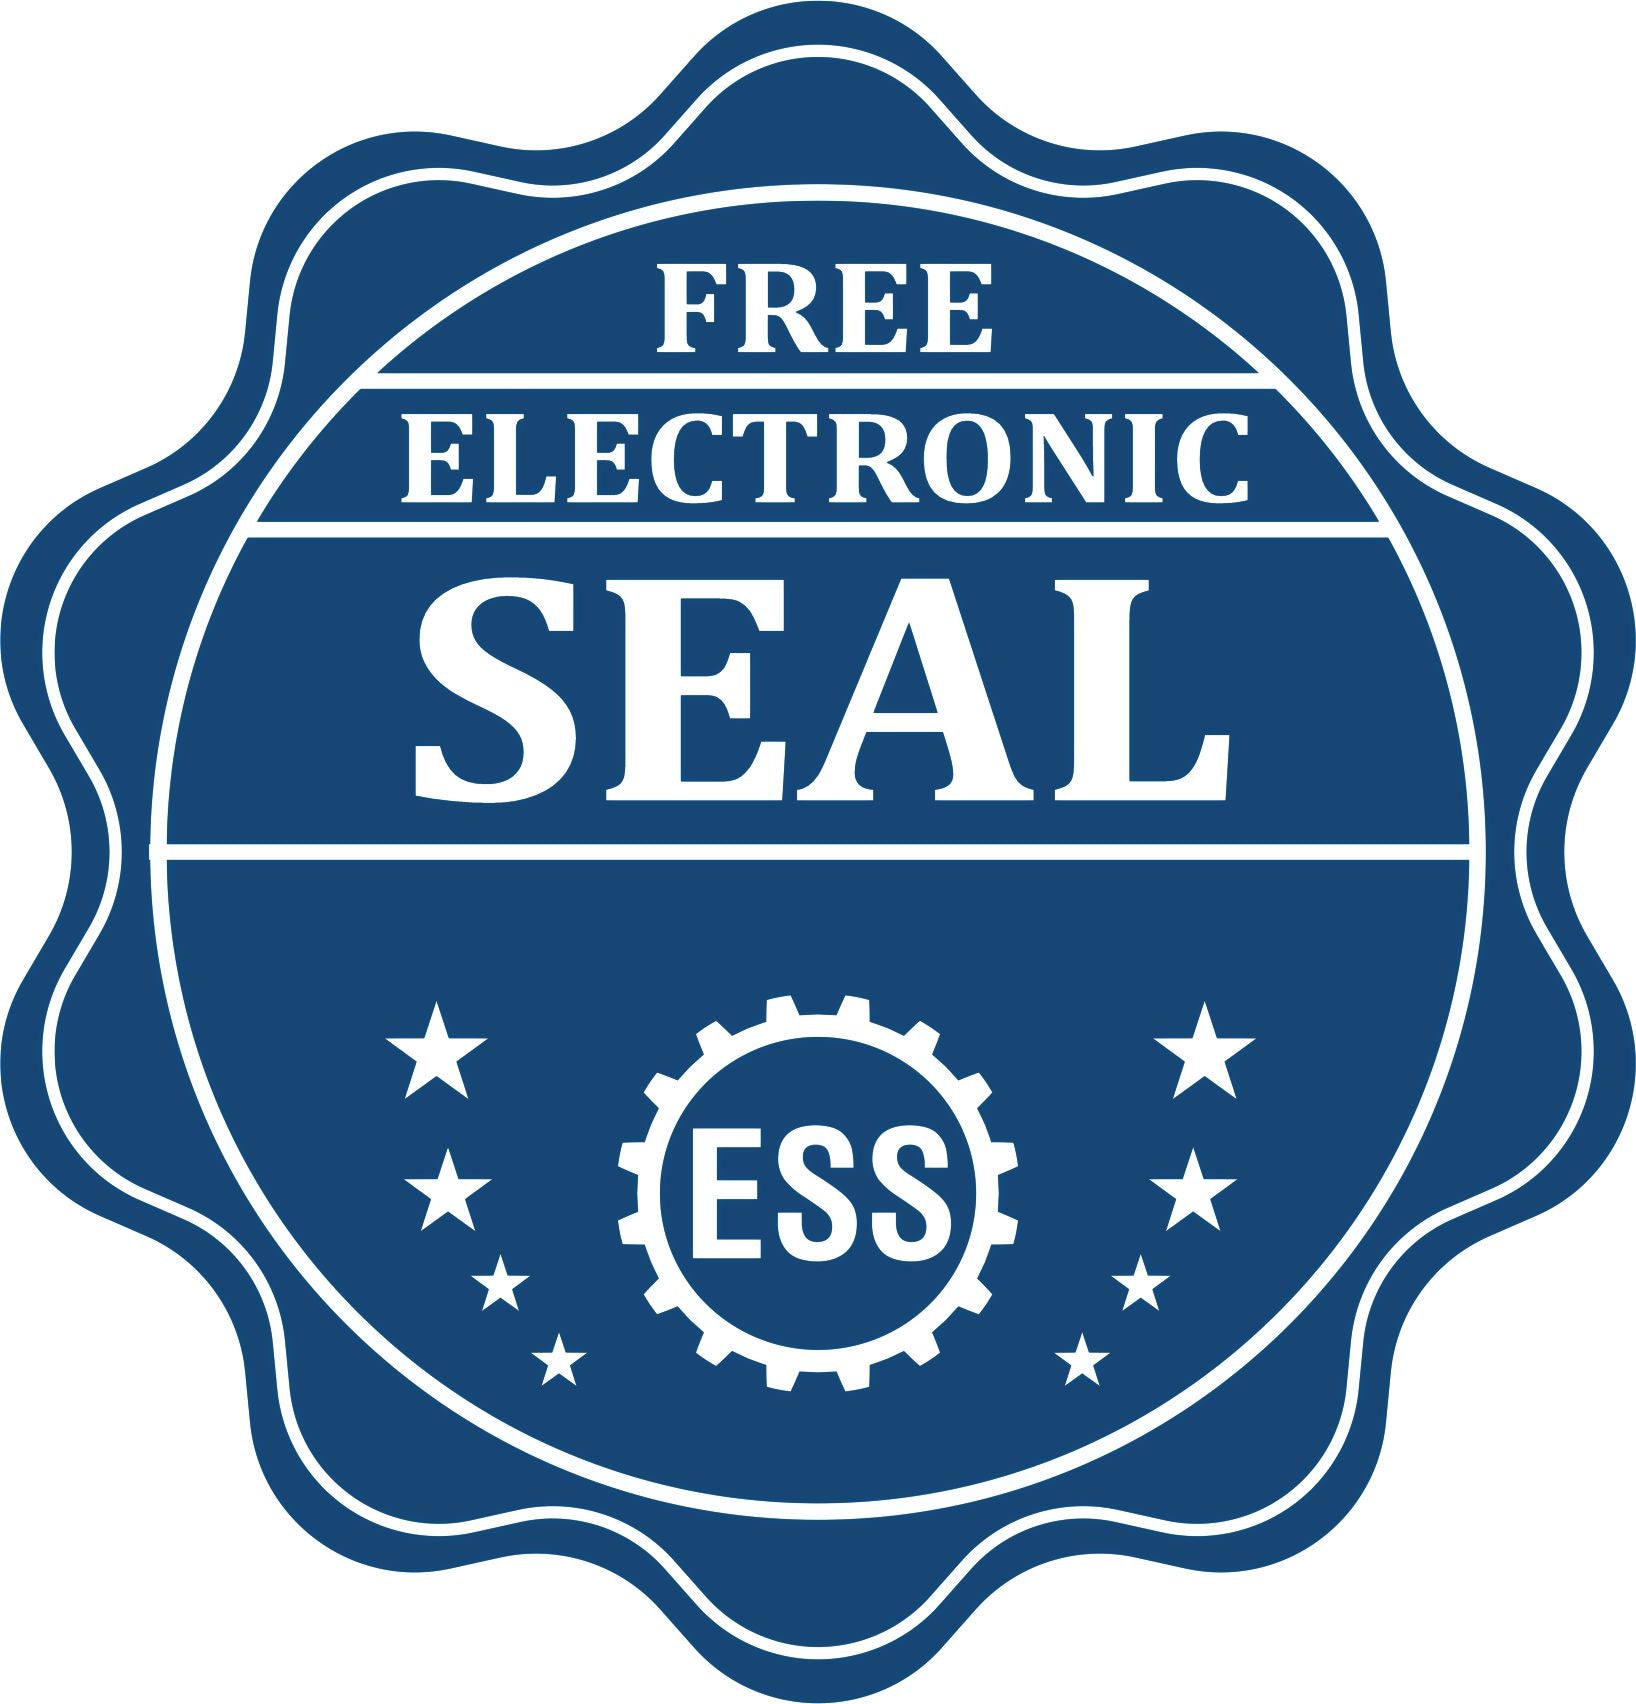 A badge showing a free electronic seal for the Indiana Professional Engineer Seal Stamp with stars and the ESS gear on the emblem.